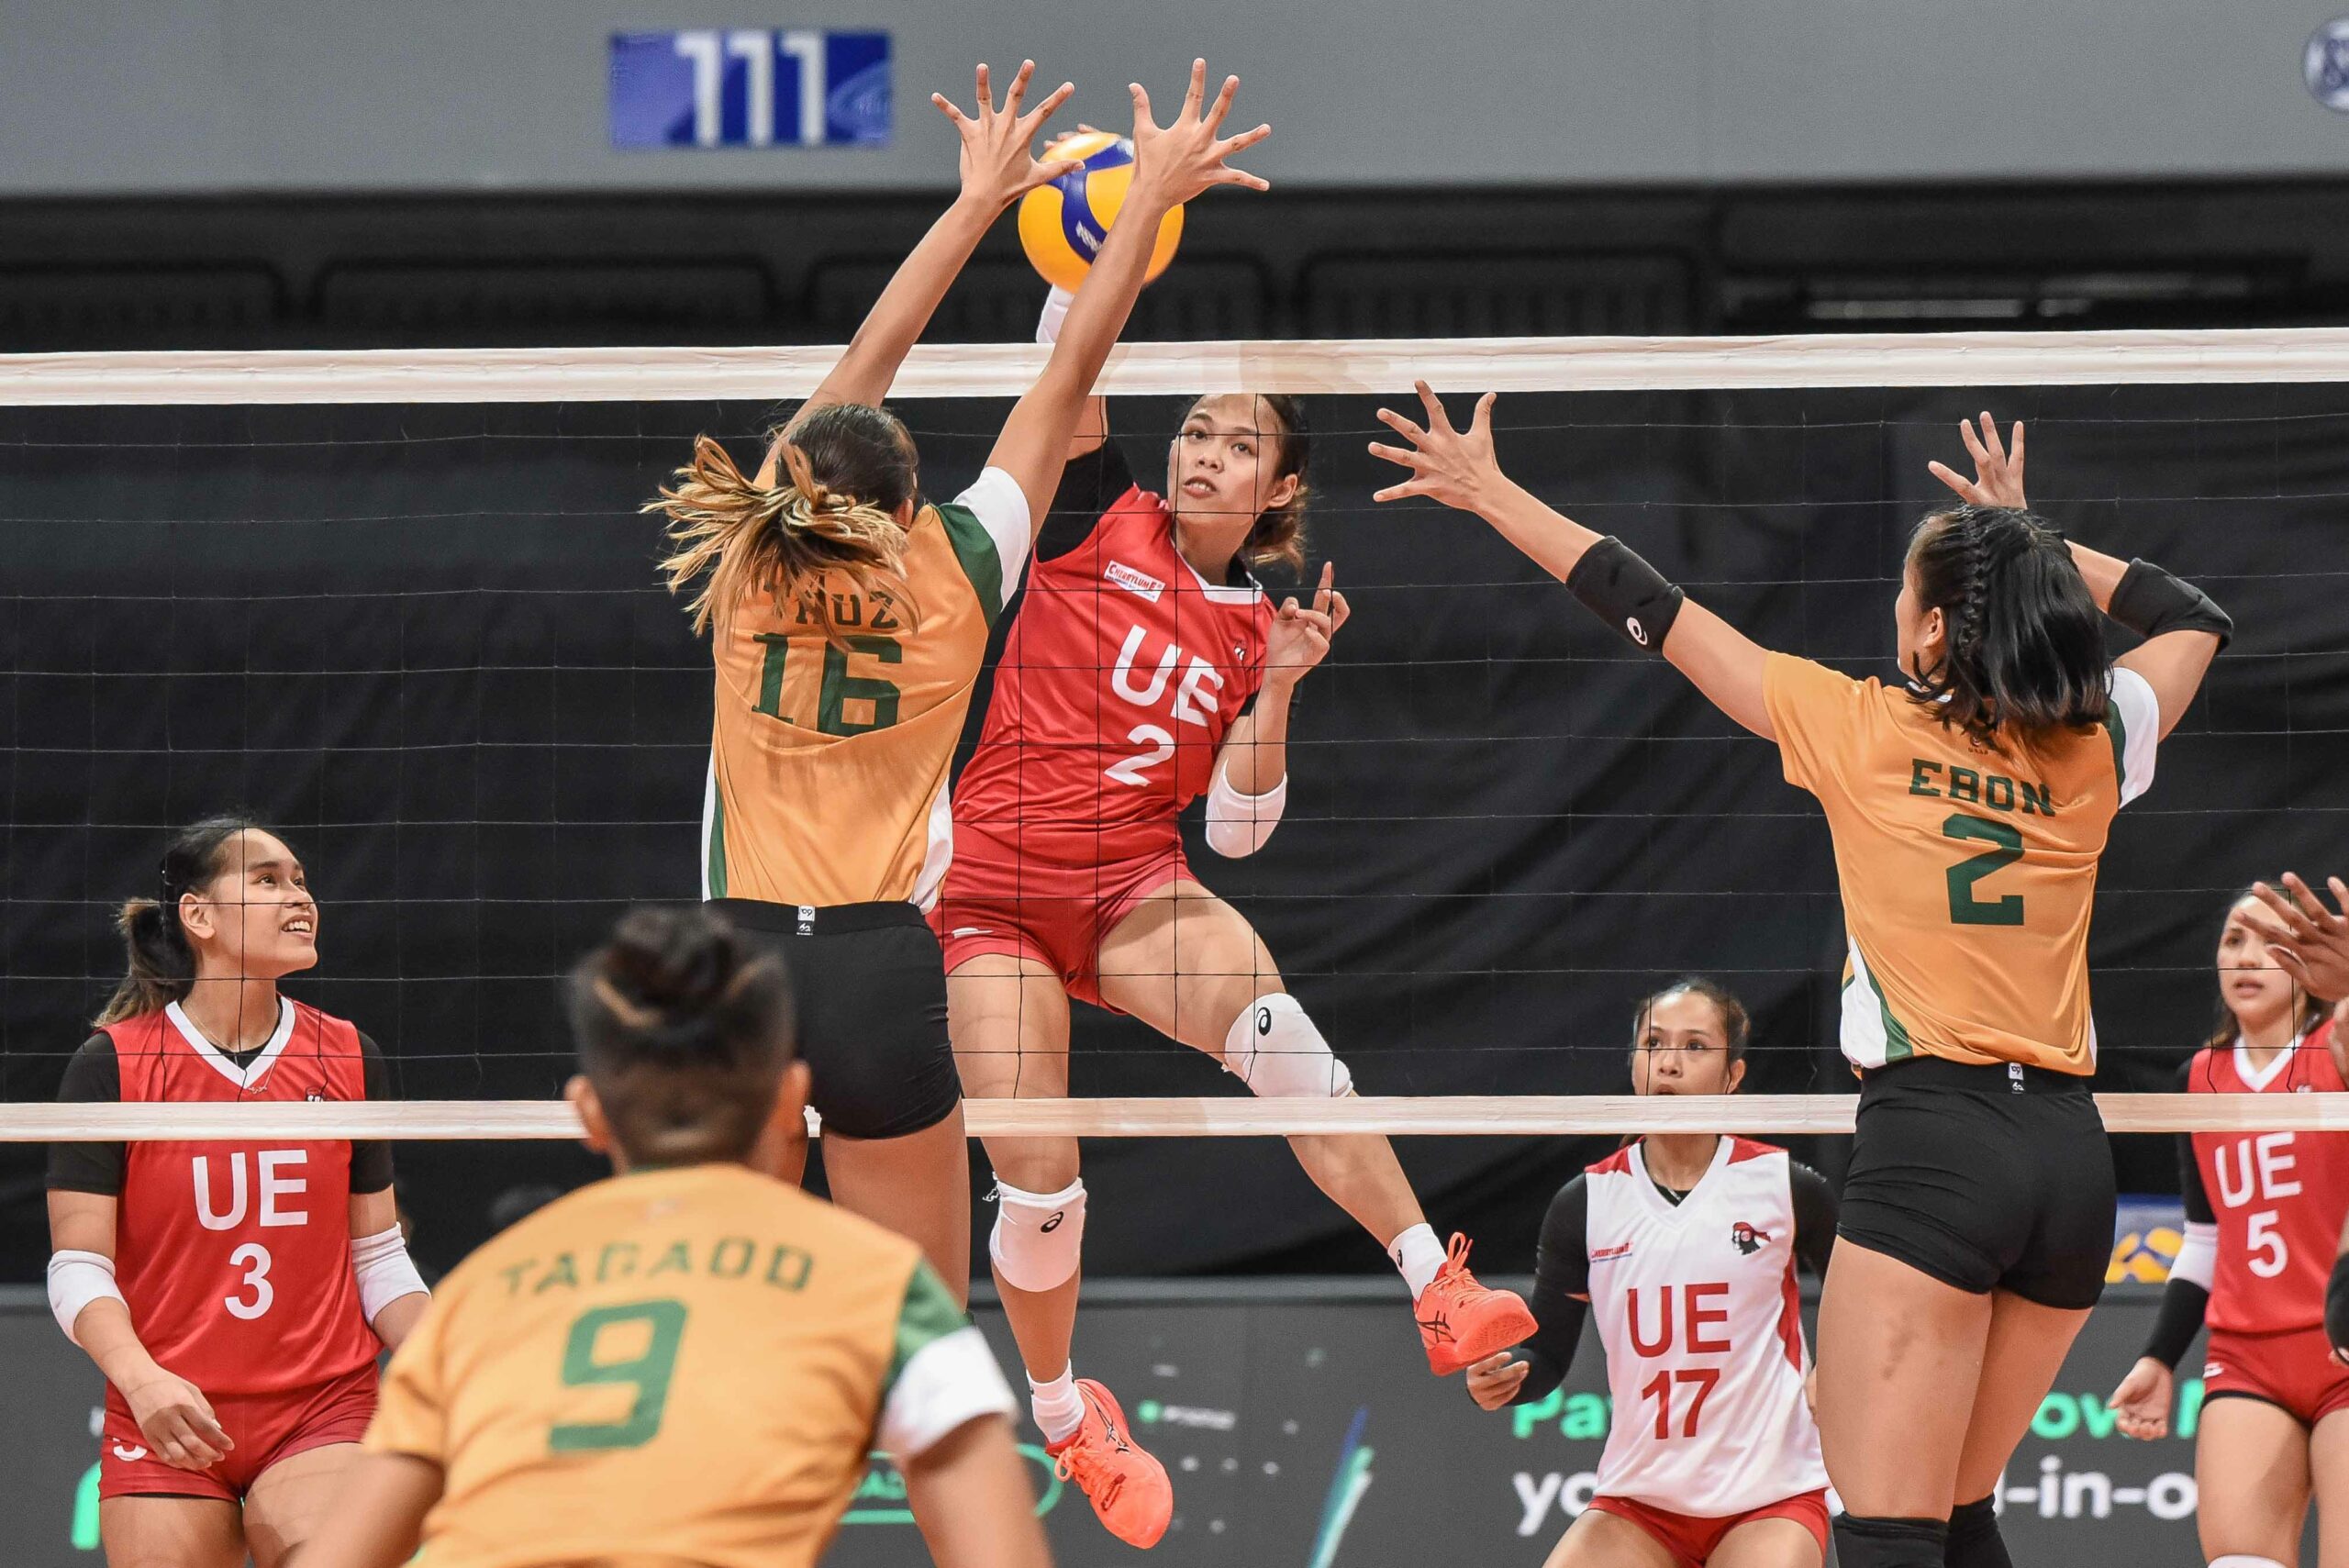 UAAP-84-Womens-Volleyball-FEU-vs-UE-Ja-Lana-2-1-scaled Gallant UAAP 84 campaign proved UE can keep up with field, says Ja Lana News UAAP UE Volleyball  - philippine sports news